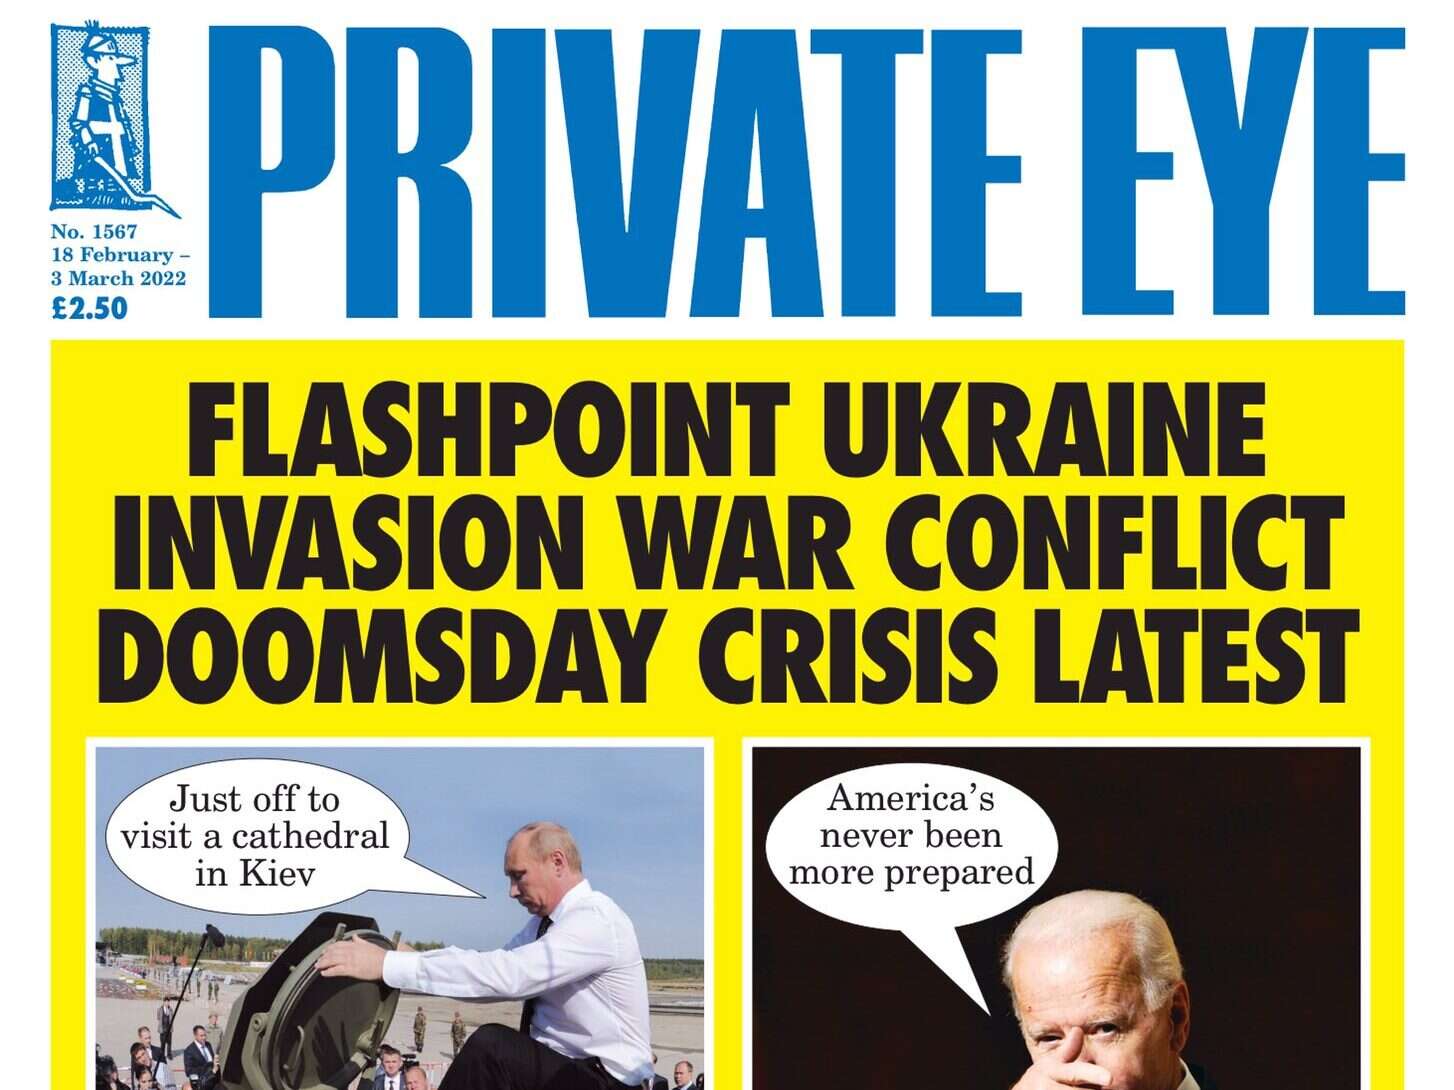 News and current affairs mag ABCs: Growing Private Eye keeps top spot